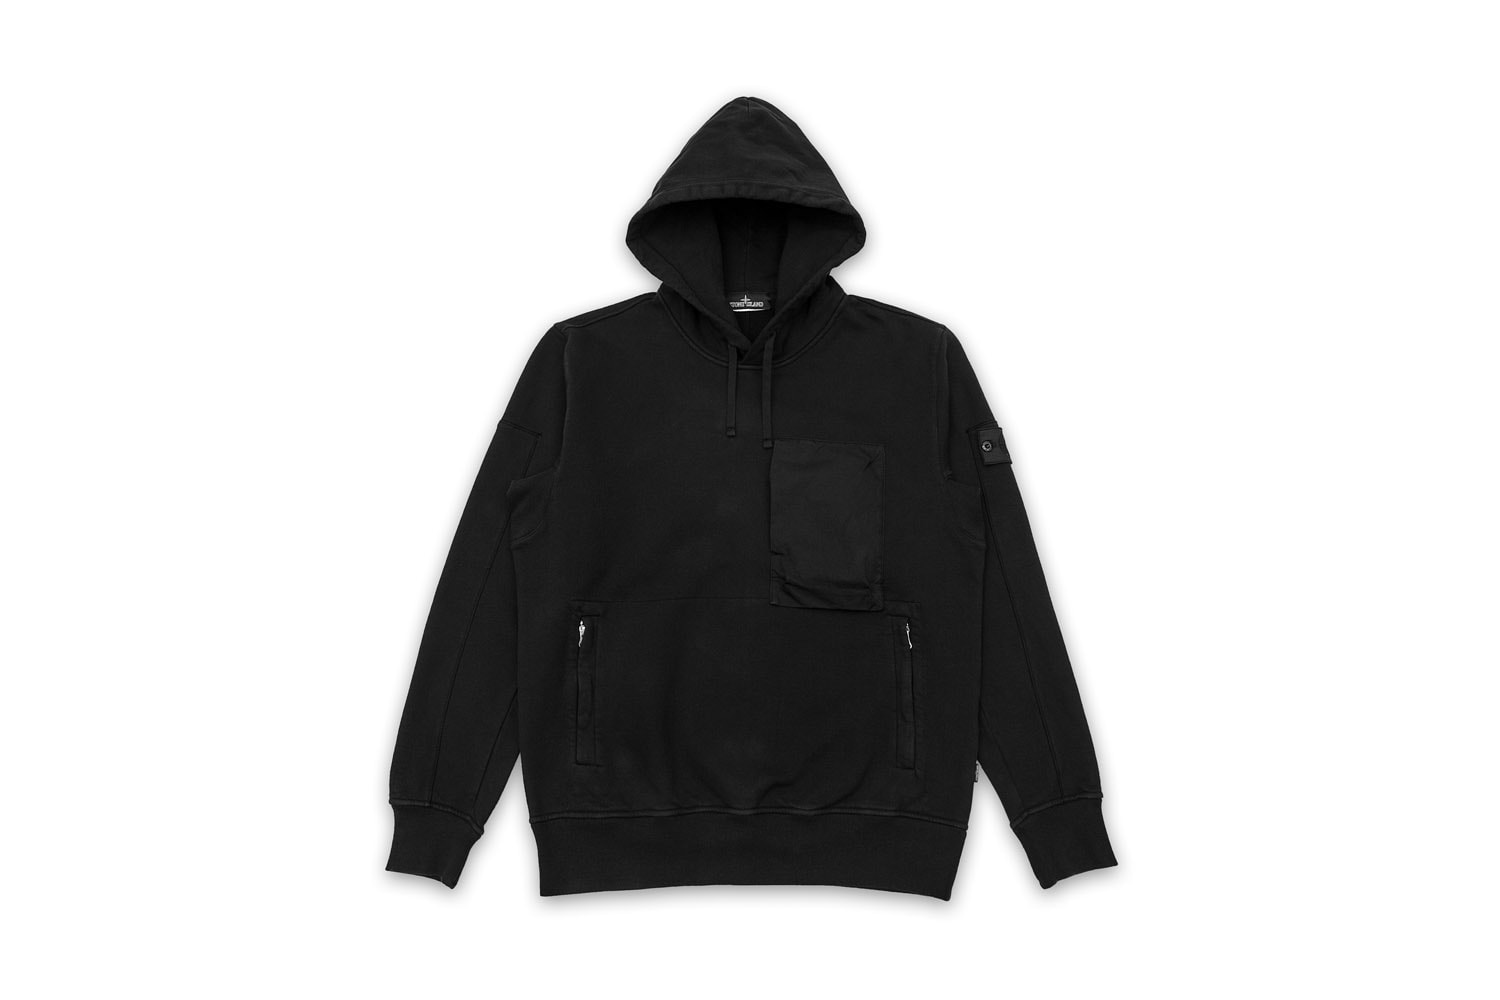 Introducing: Stone Island Shadow Project 10 Year Anniversary 